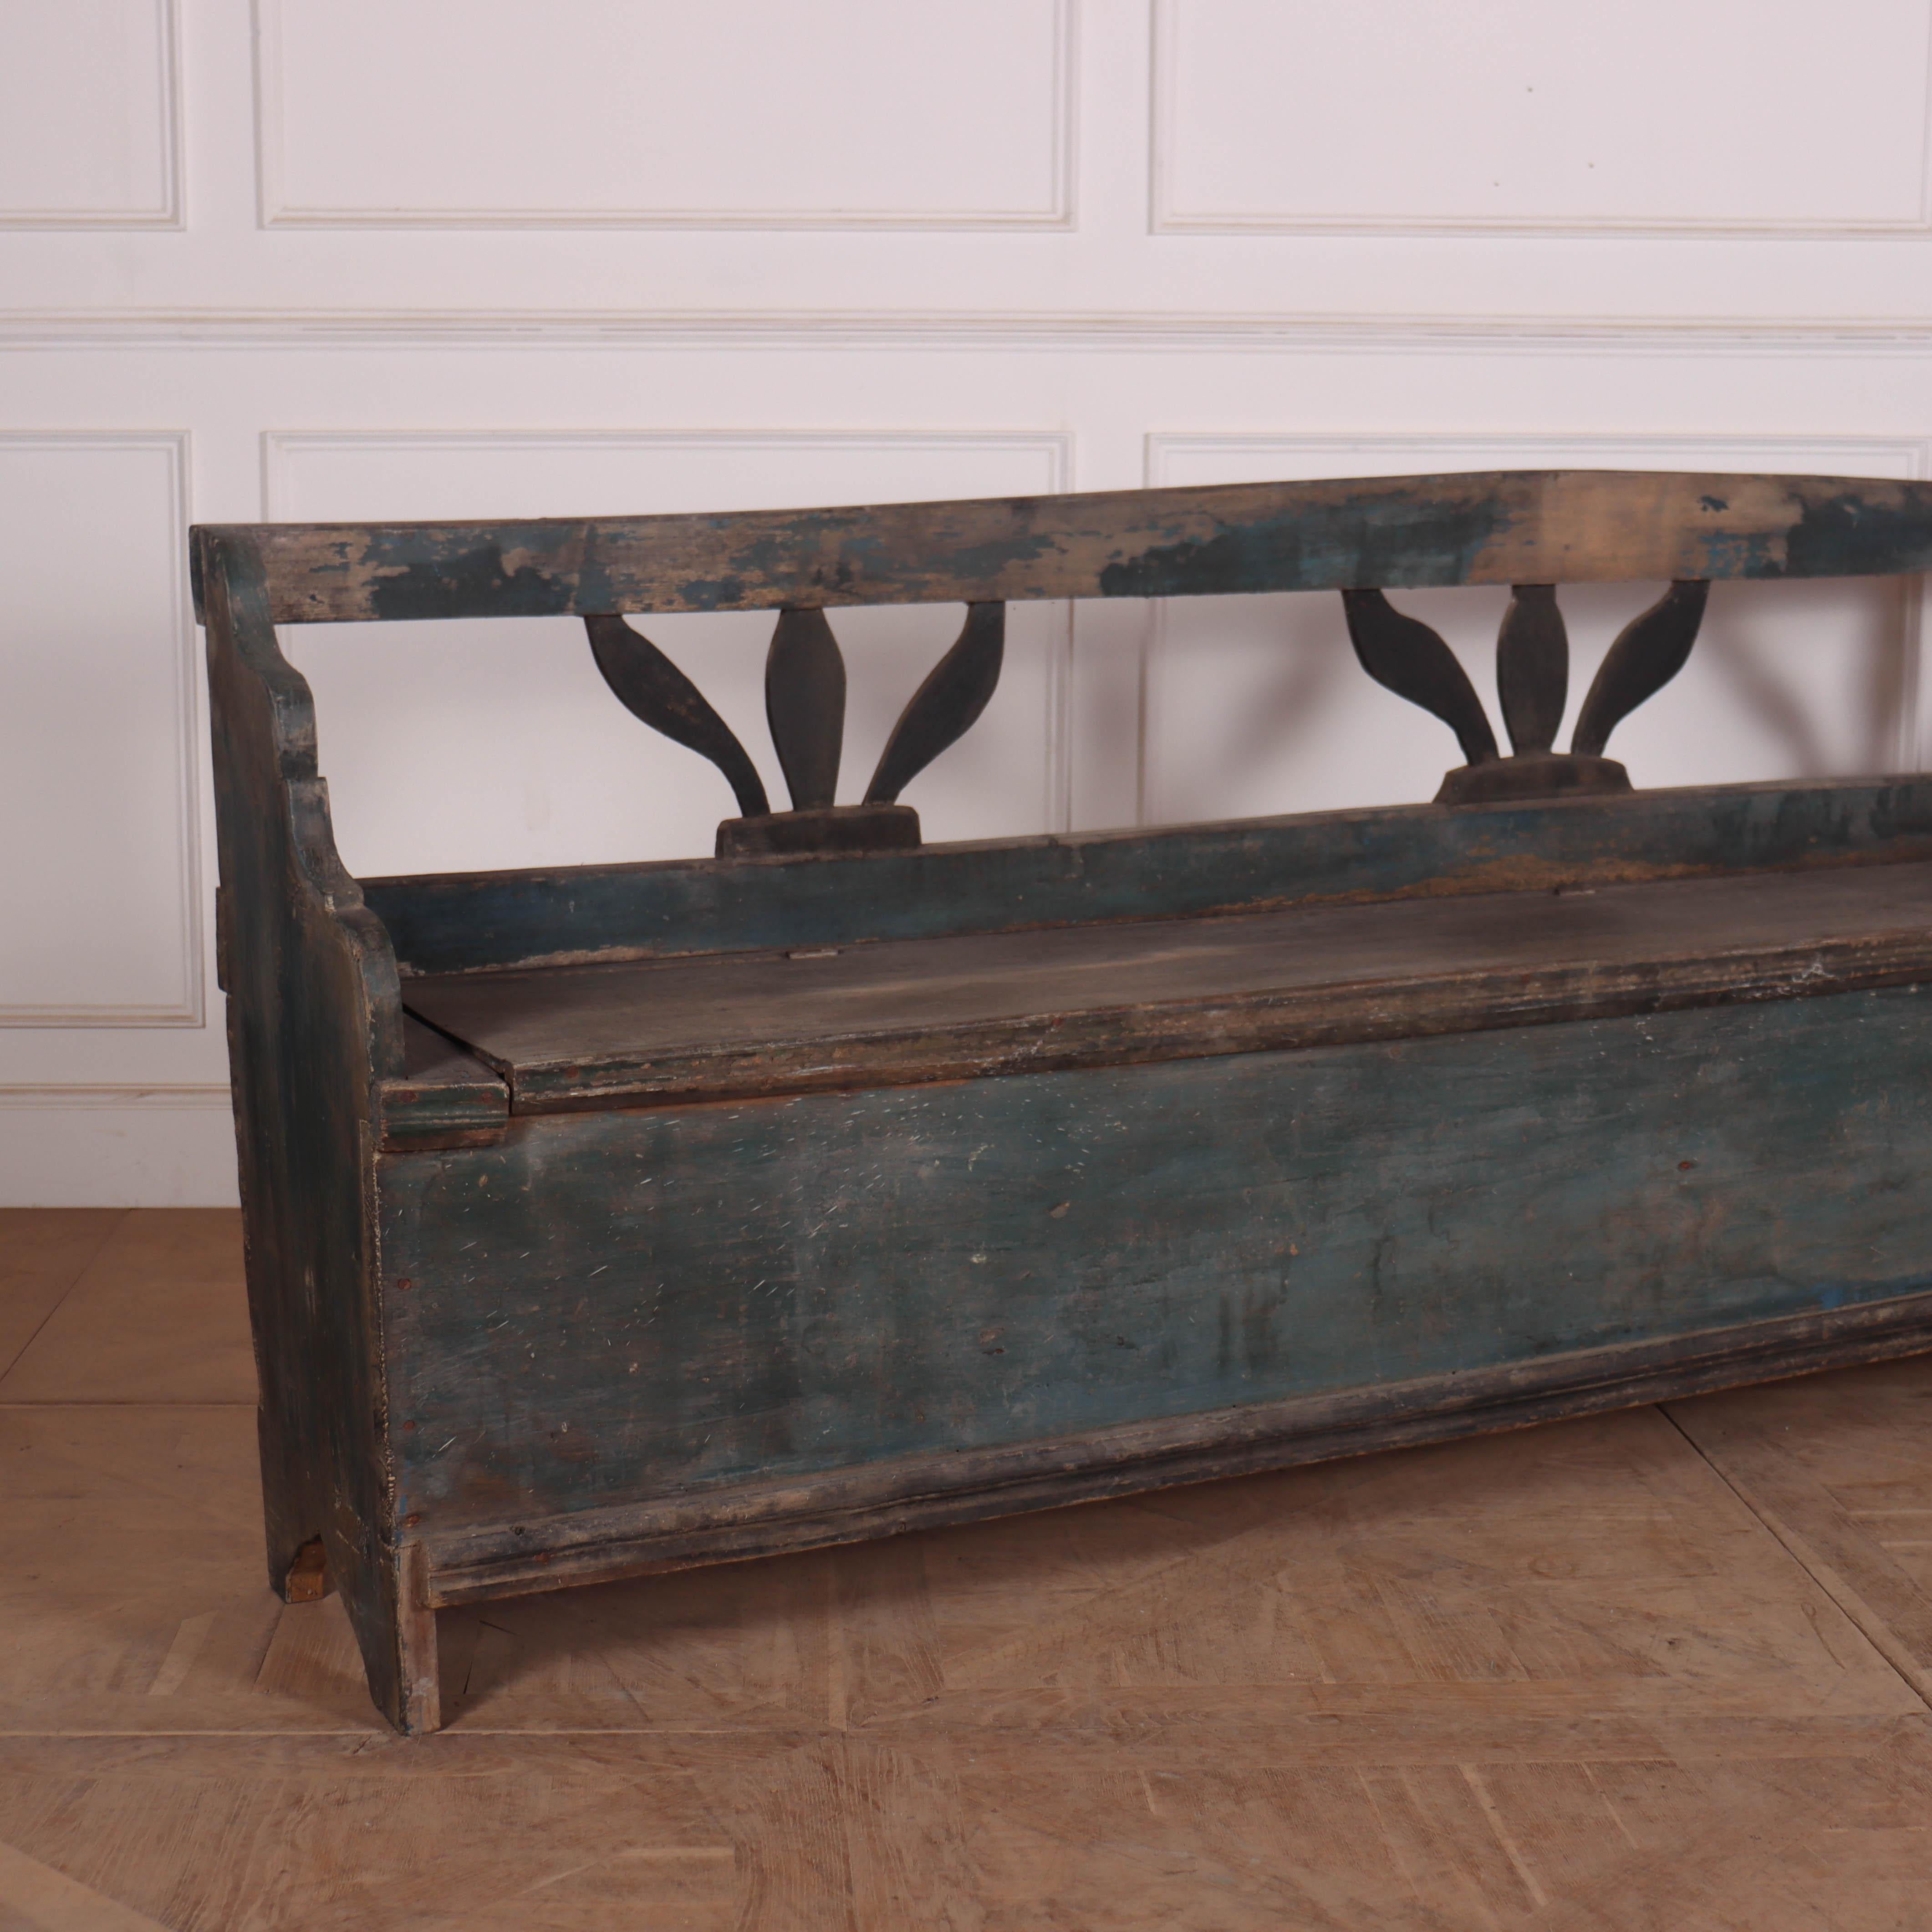 Large 19th C Austrian original painted pine bench with storage under the seat. 1880.

Seat height is 22